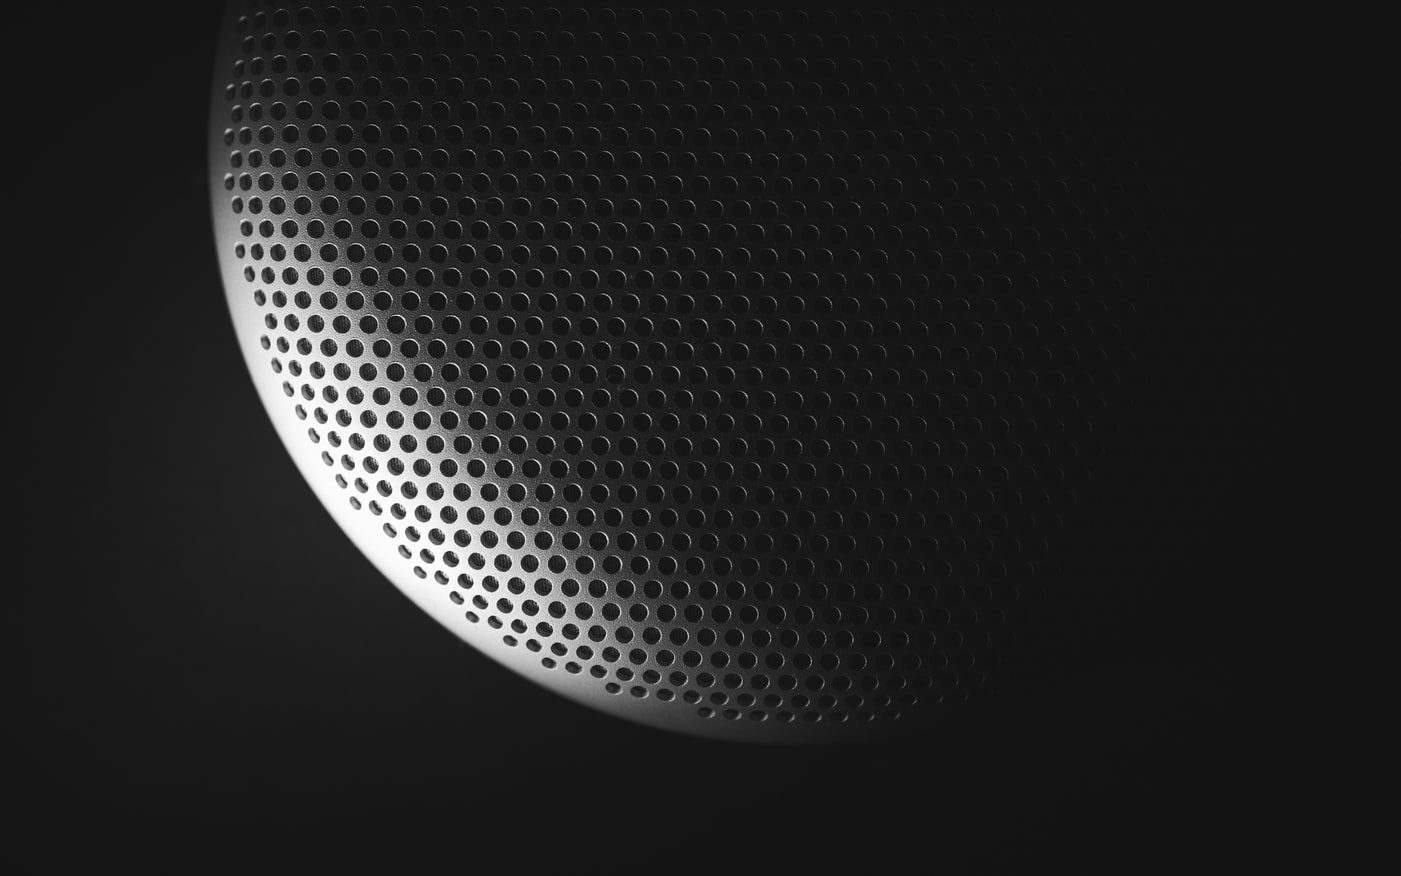 black and white sphere